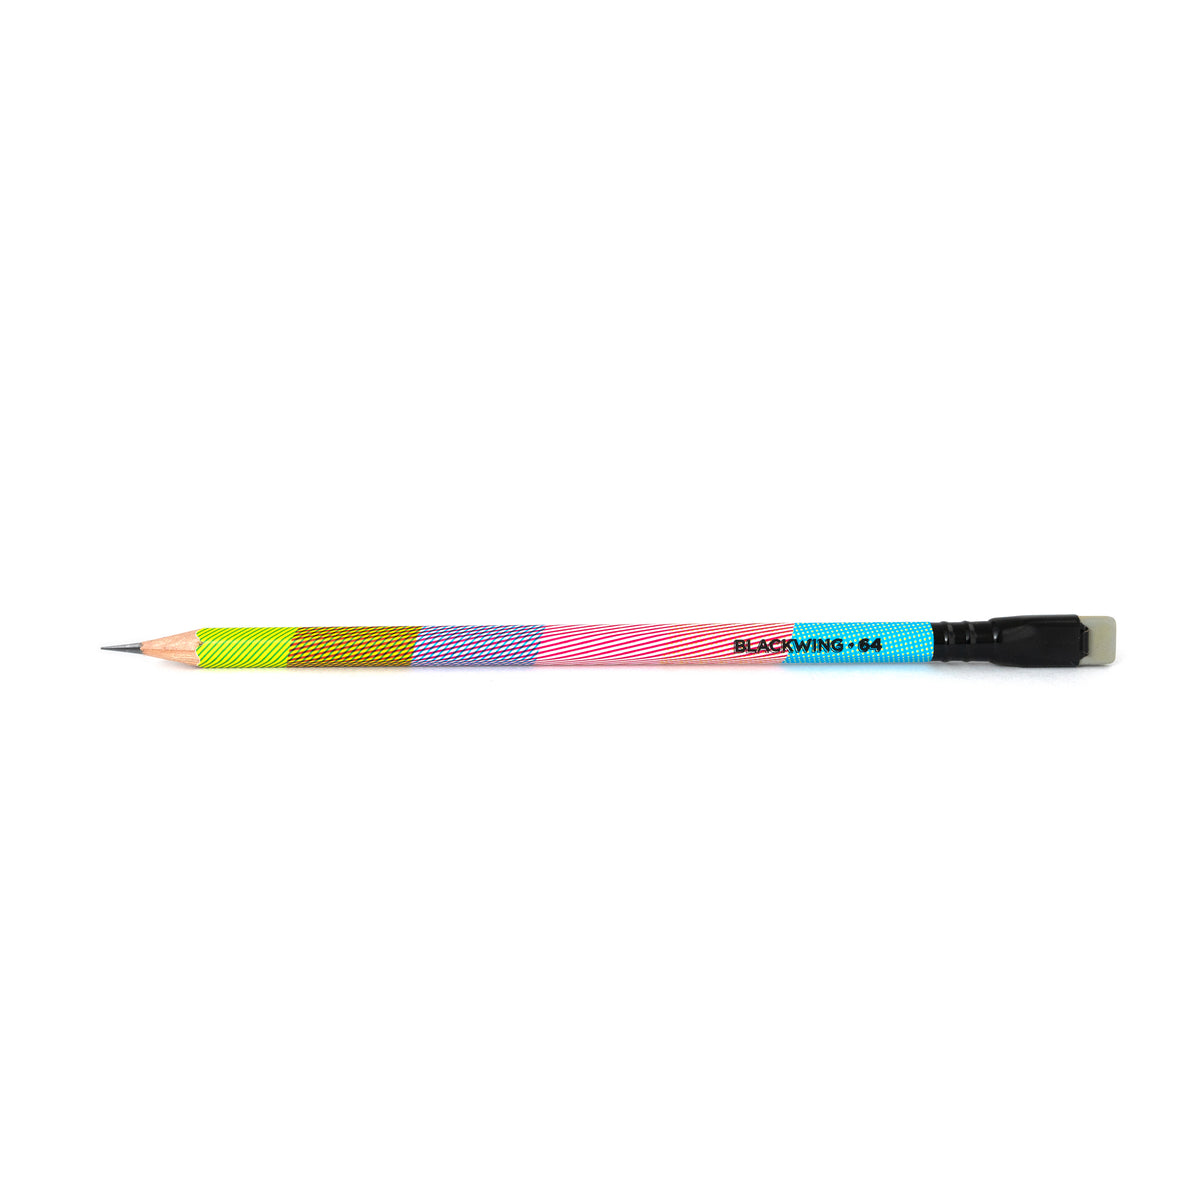 A Blackwing Volume 64 (Set of 12) with a colorful stripe reminiscent of a rainbow.